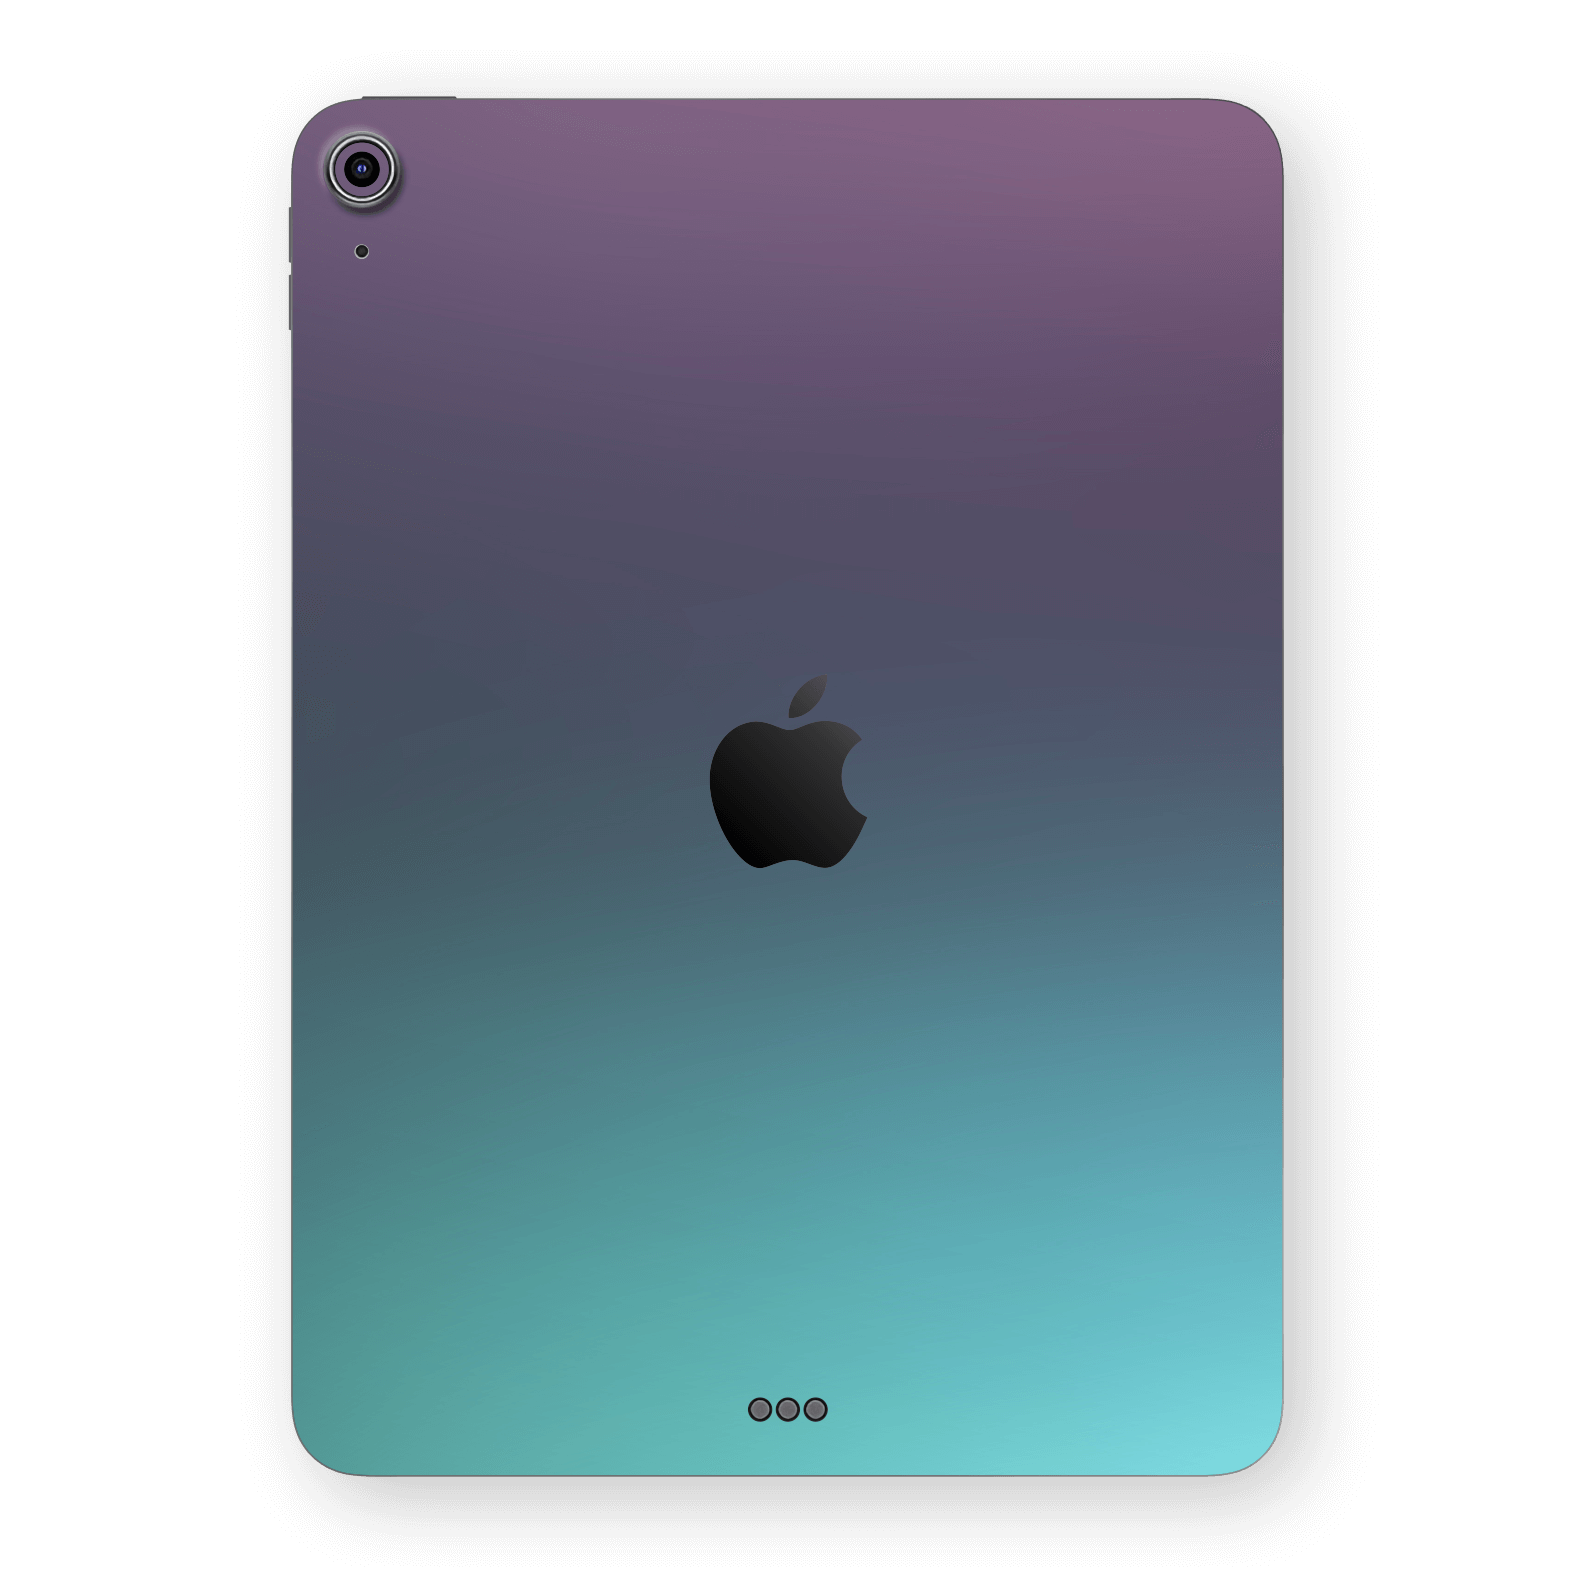 iPad Air 11” (M2) Chameleon Turquoise-Lavender Lilac Colour-changing Metallic Skin Wrap Sticker Decal Cover Protector by QSKINZ | qskinz.com